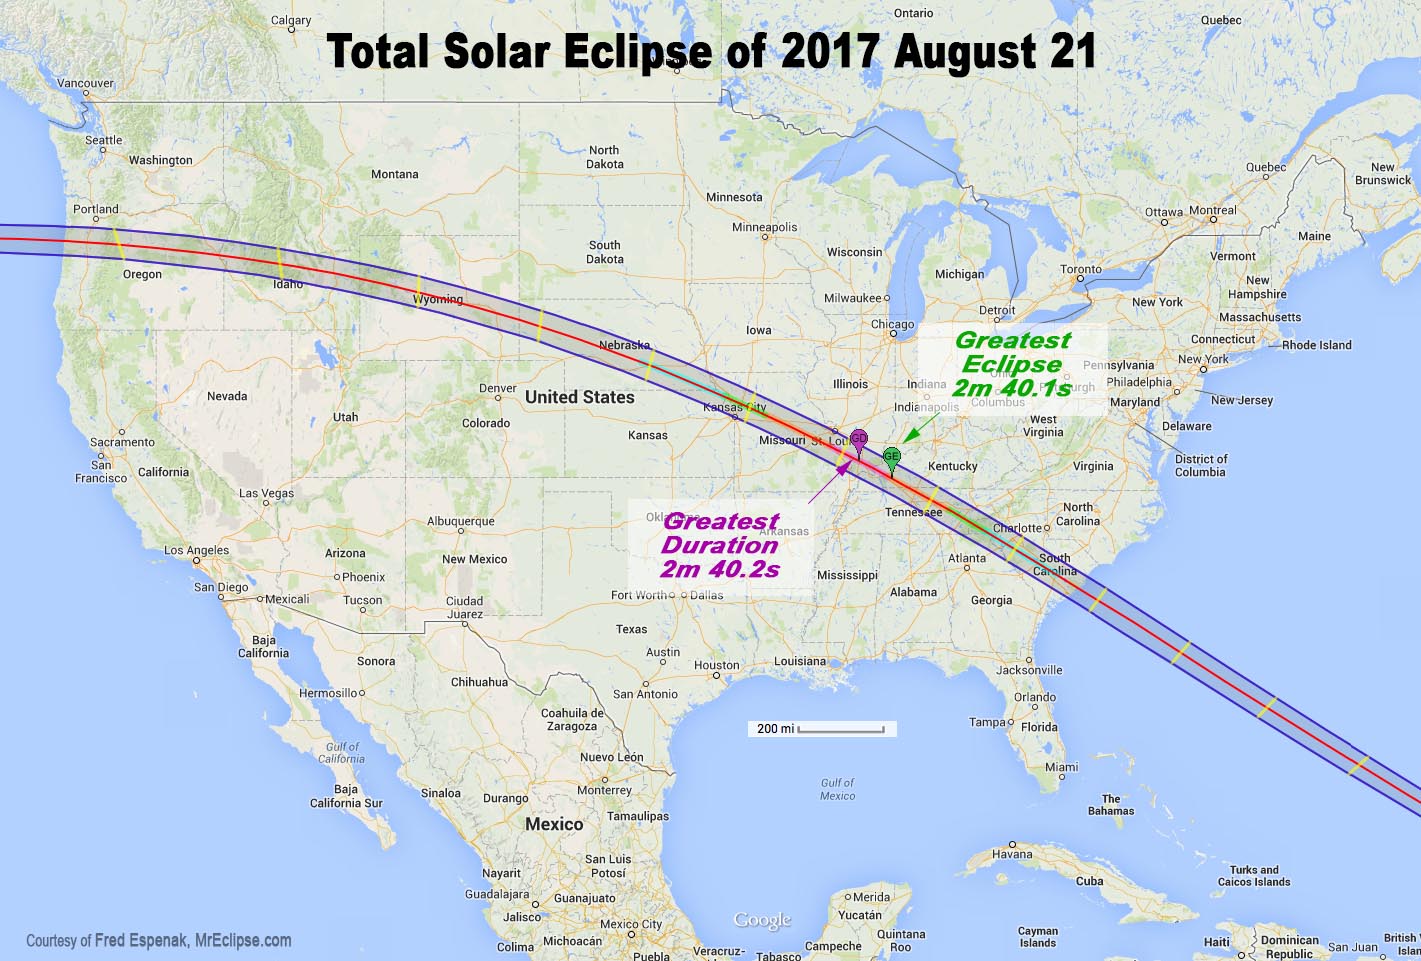 NASA Animation Offers A Freakishly Accurate Look At This Year’s US Coast-To-Coast Eclipse